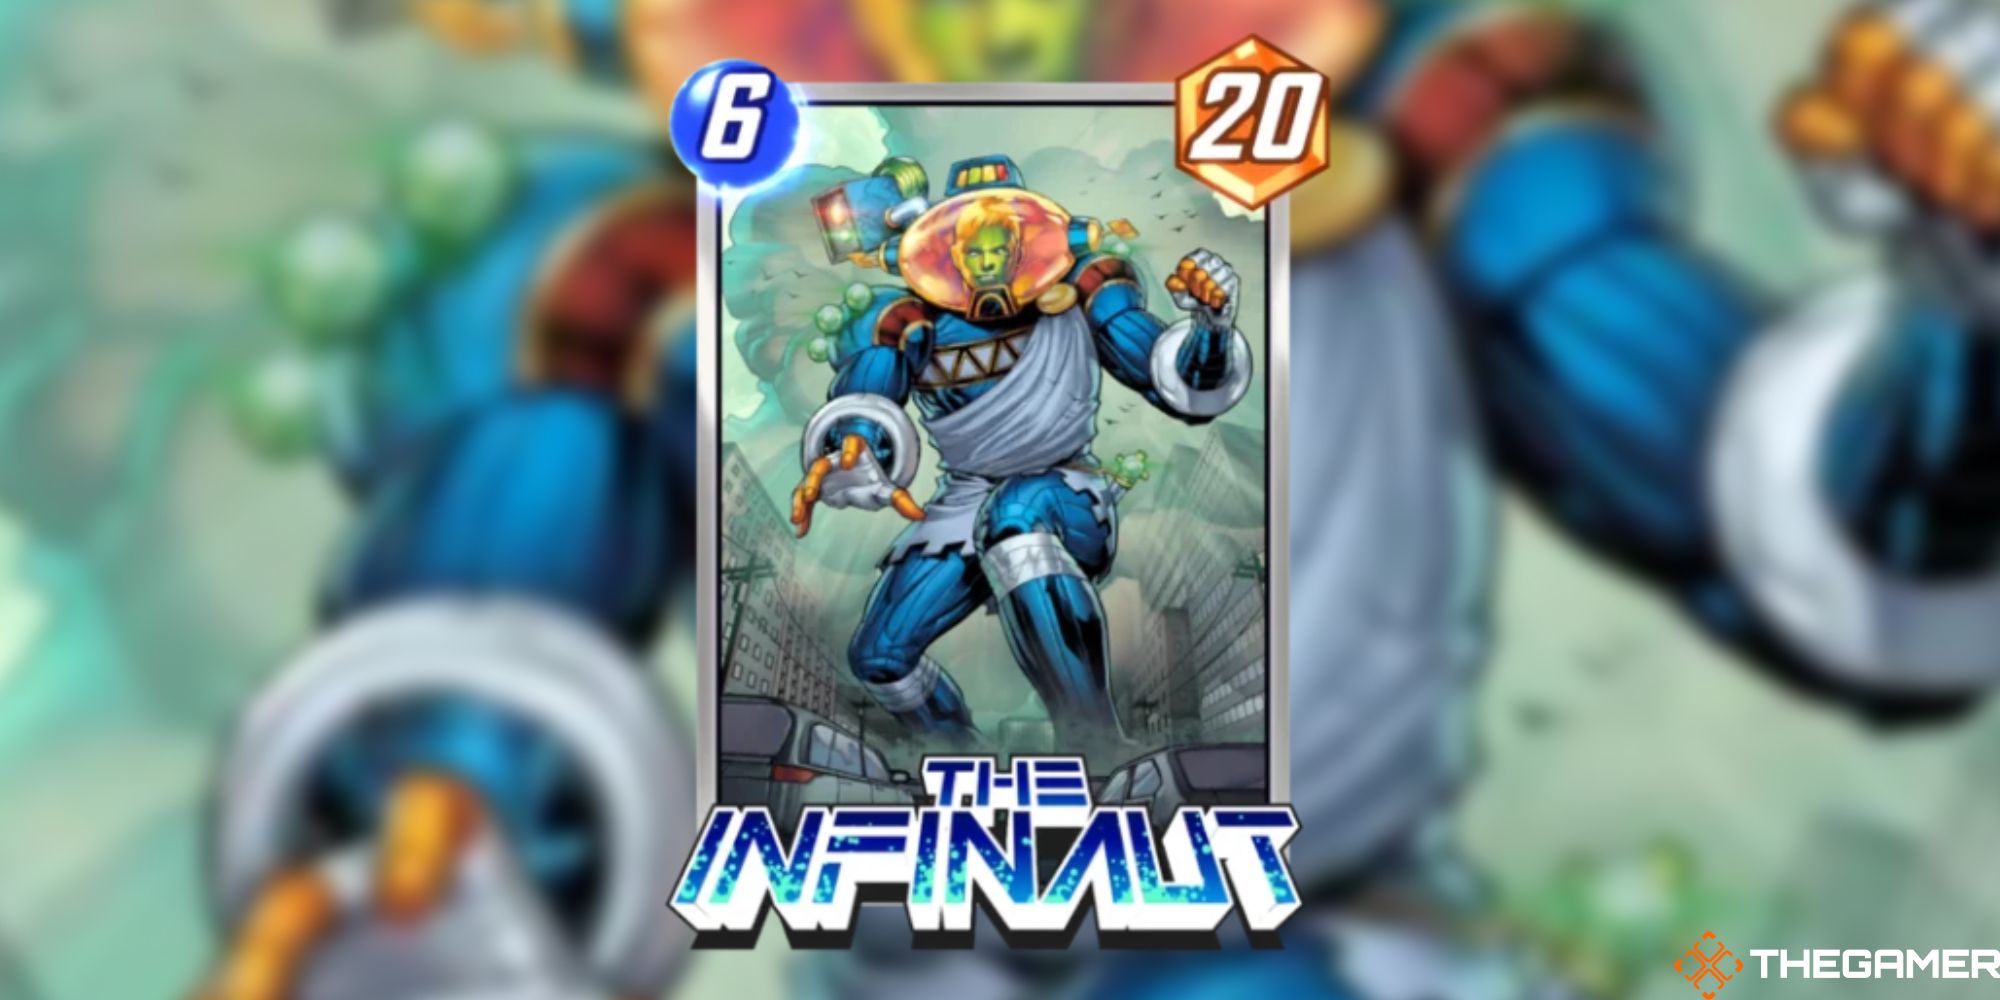 Marvel Snap - The Infinaut on a blurred background